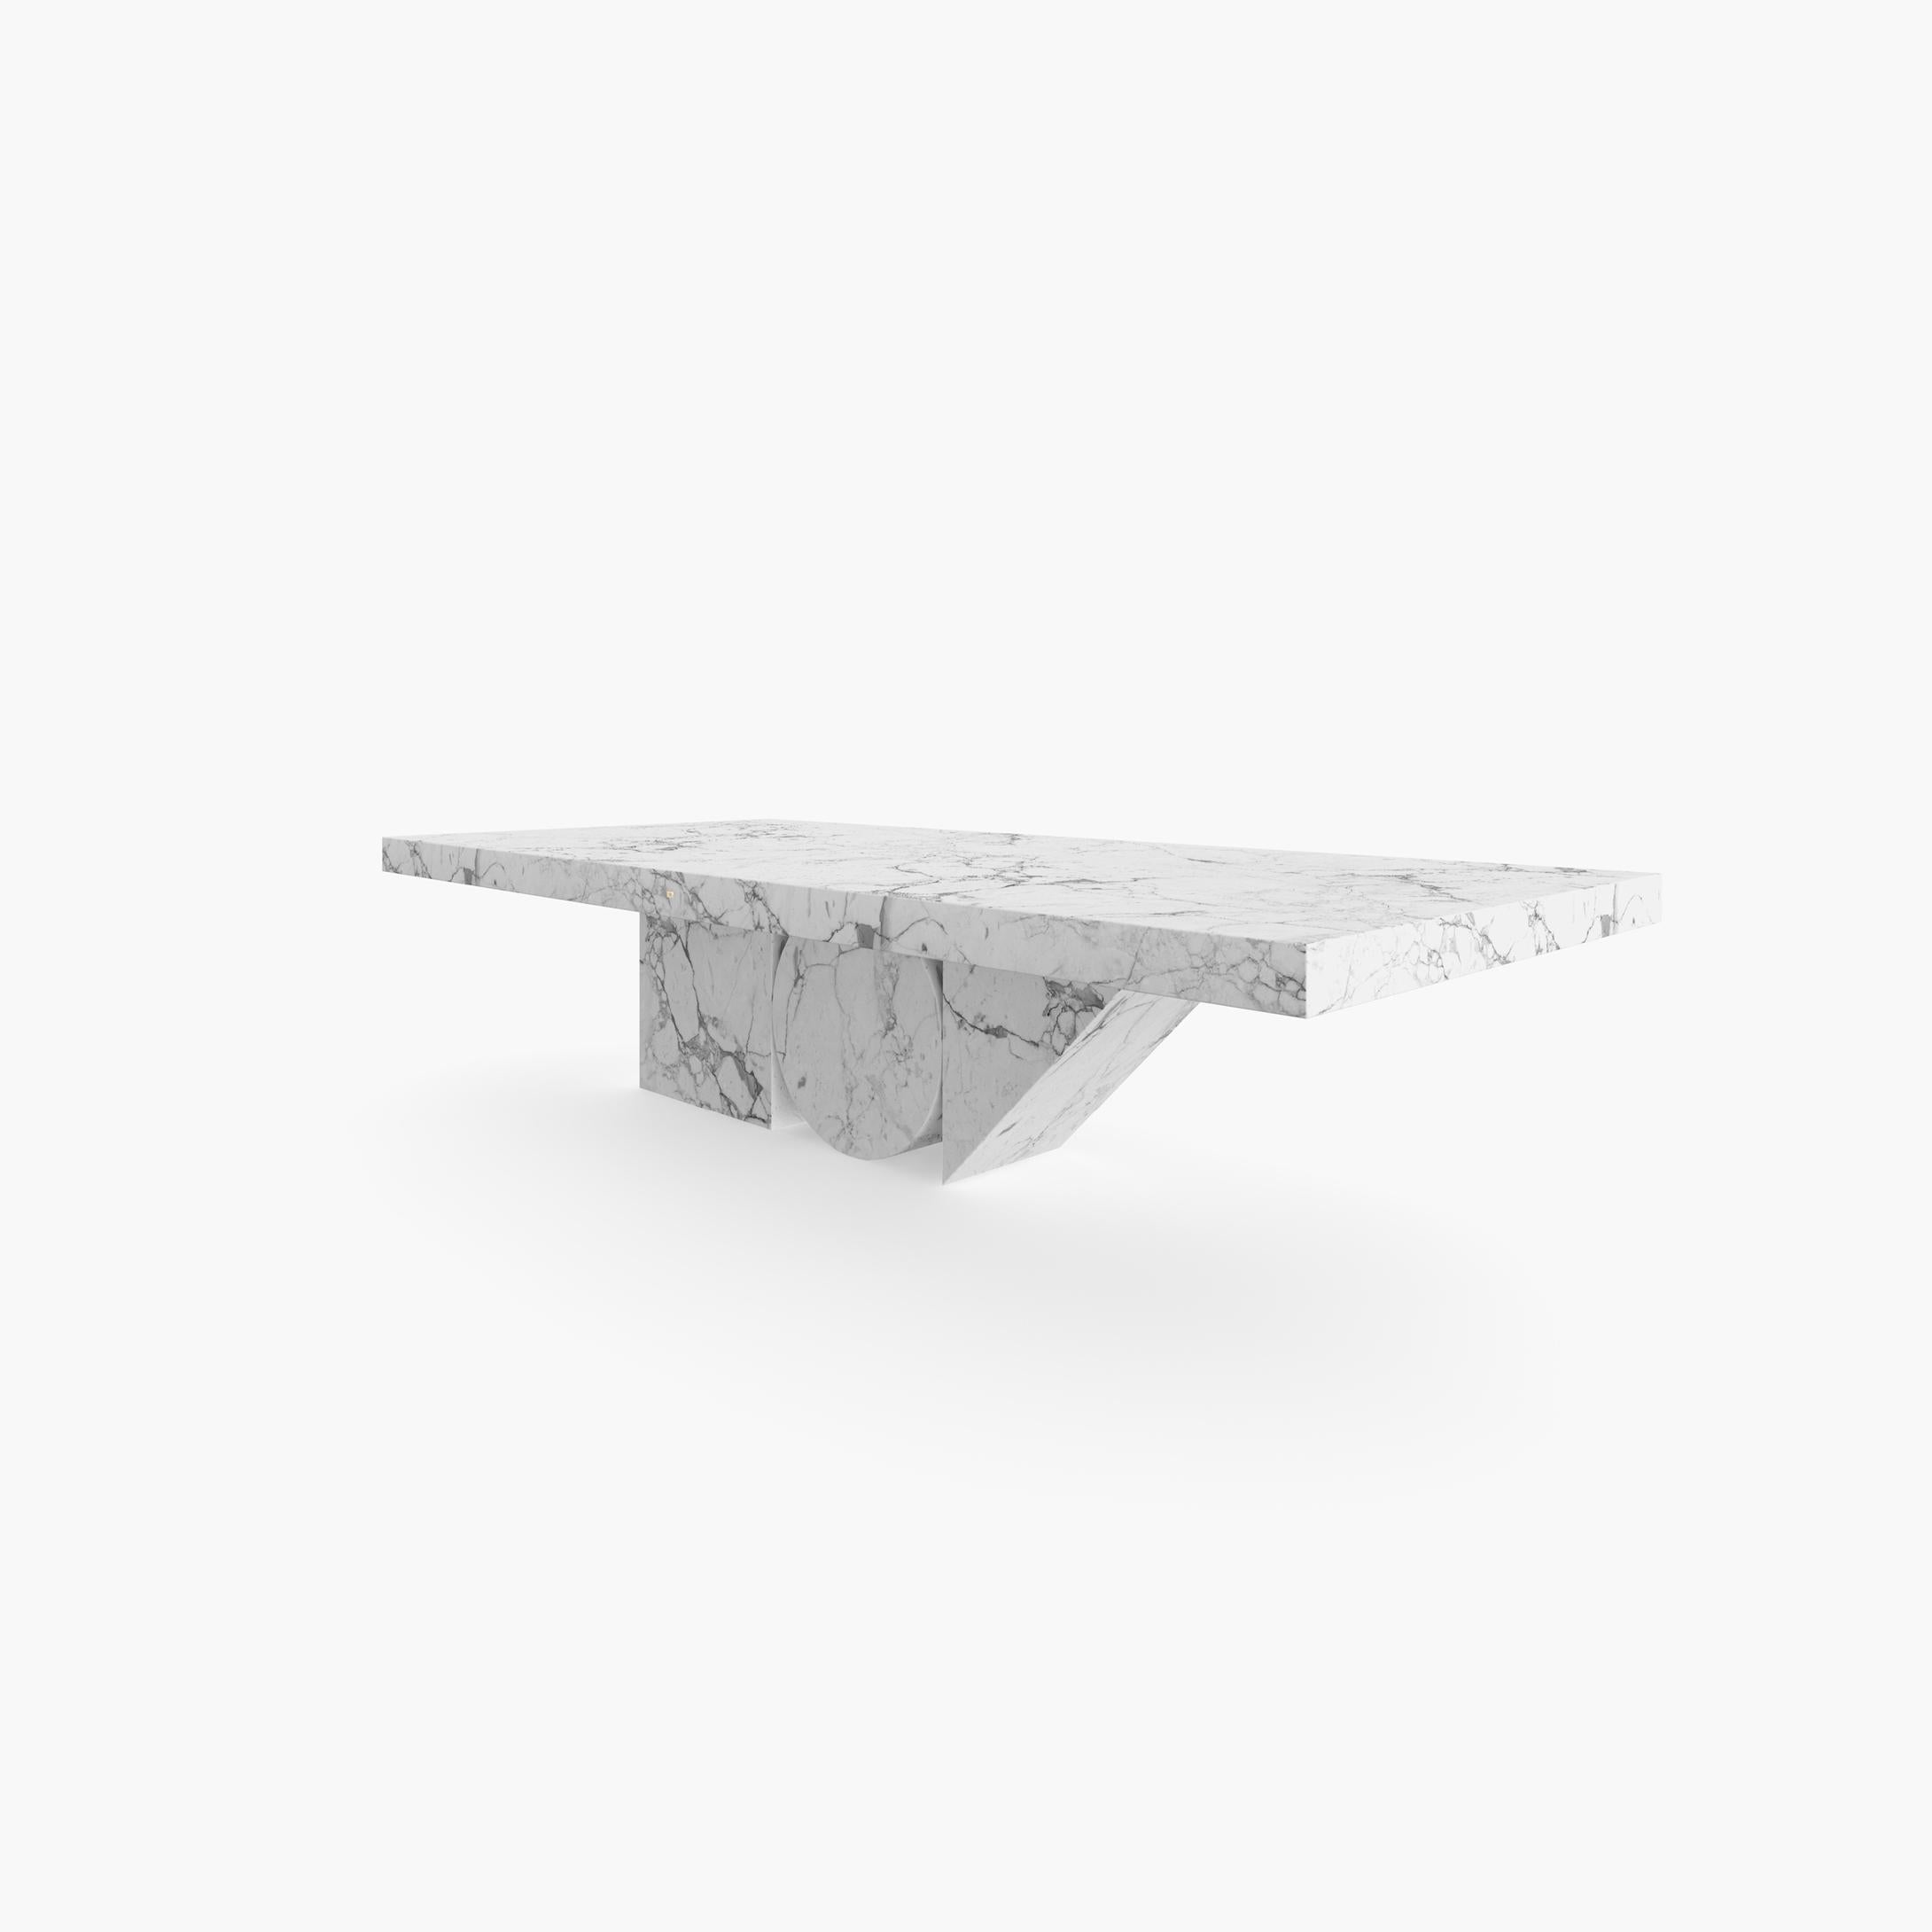 European Dining-Table White Marble 300x140x76cm Triangle, Circle, Square Leg, Handcrafted For Sale